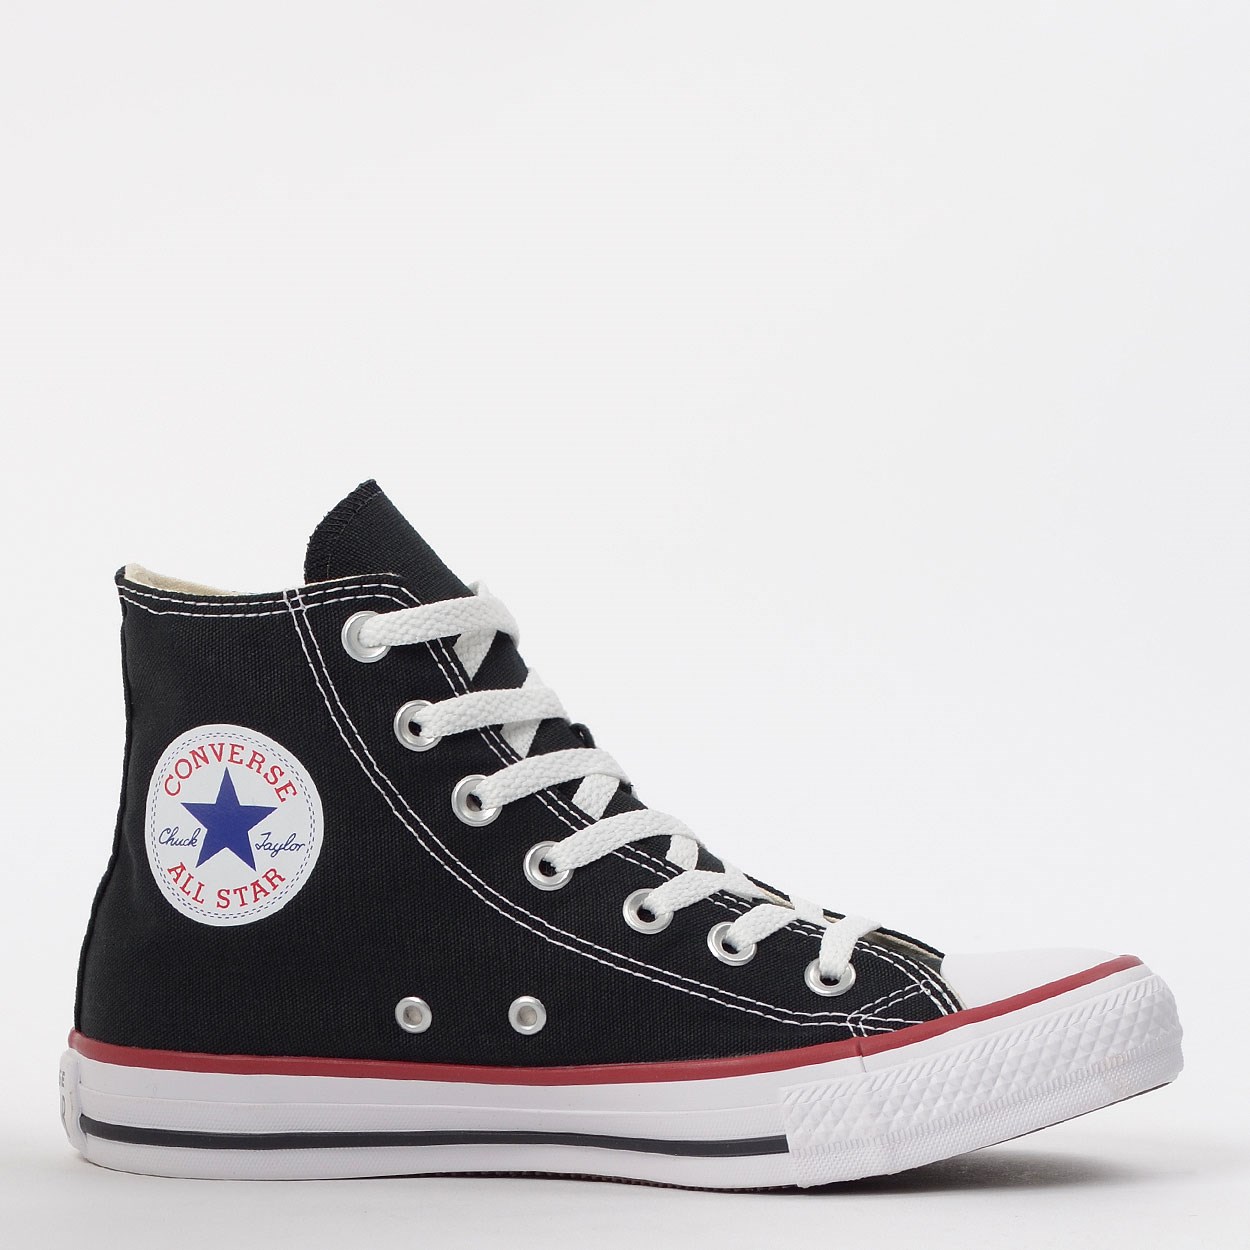 all star Shop Clothing \u0026 Shoes Online